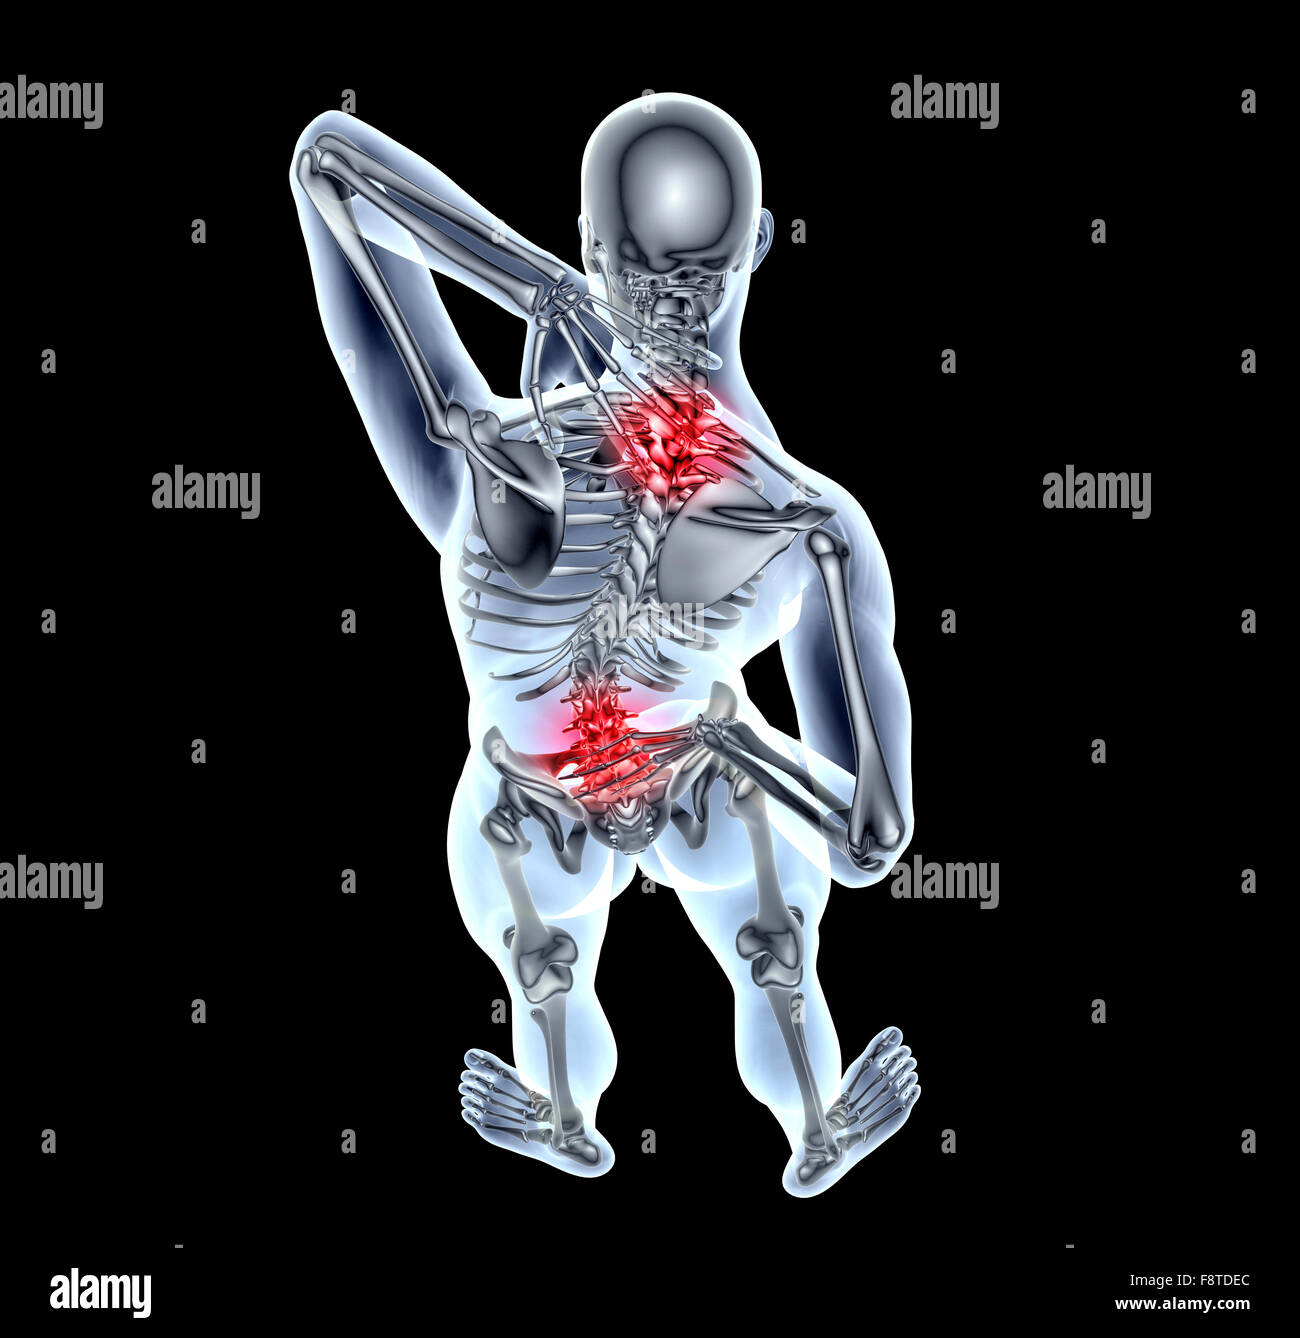 https://c8.alamy.com/comp/F8TDEC/x-ray-image-of-a-man-with-back-pain-on-black-with-clipping-path-F8TDEC.jpg